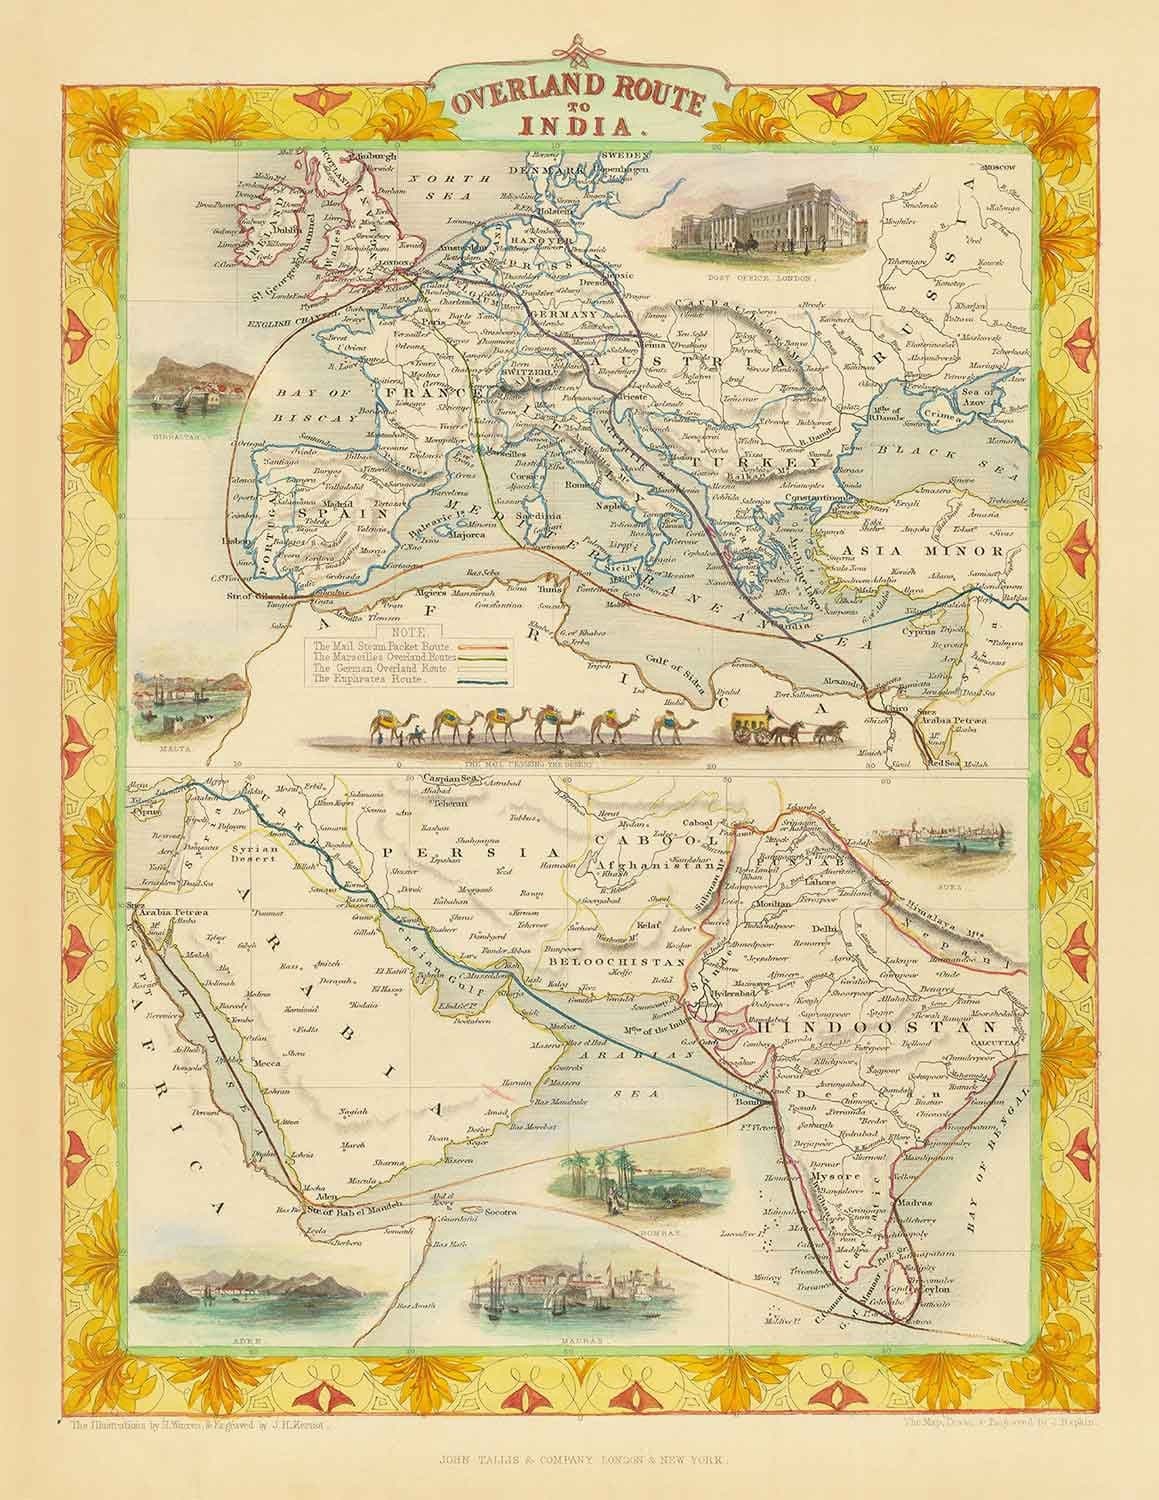 Old Mail Route Map: Europe to India, 1851 - British Empire Overland Trade - Suez, Camels, Red Sea, Arabia